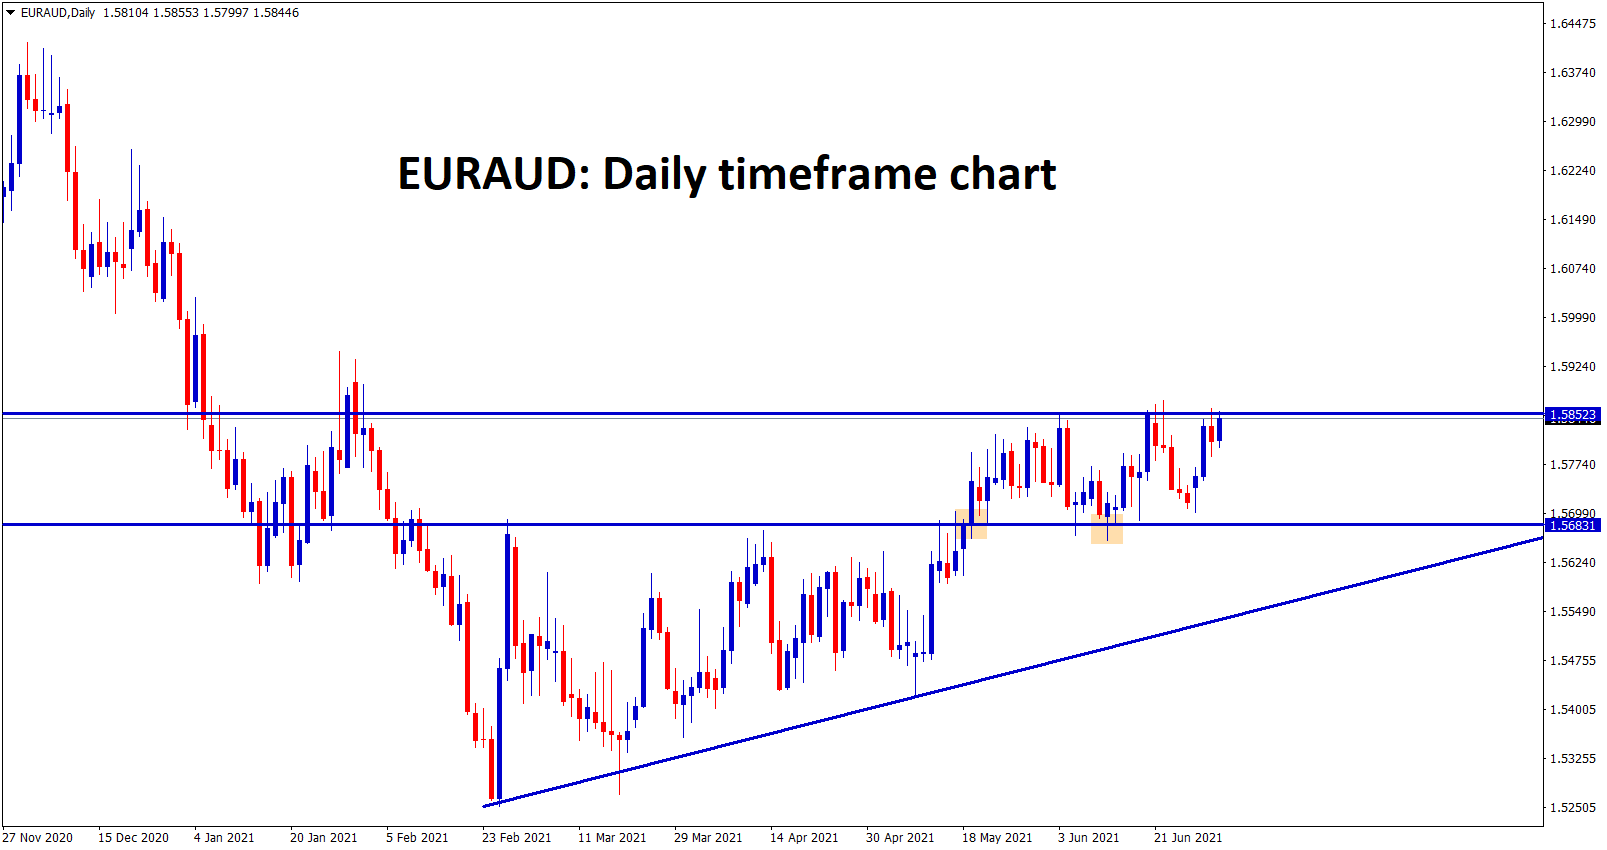 EURAUD broke the top of the Ascending Triangle now its trying to break further resistance levels